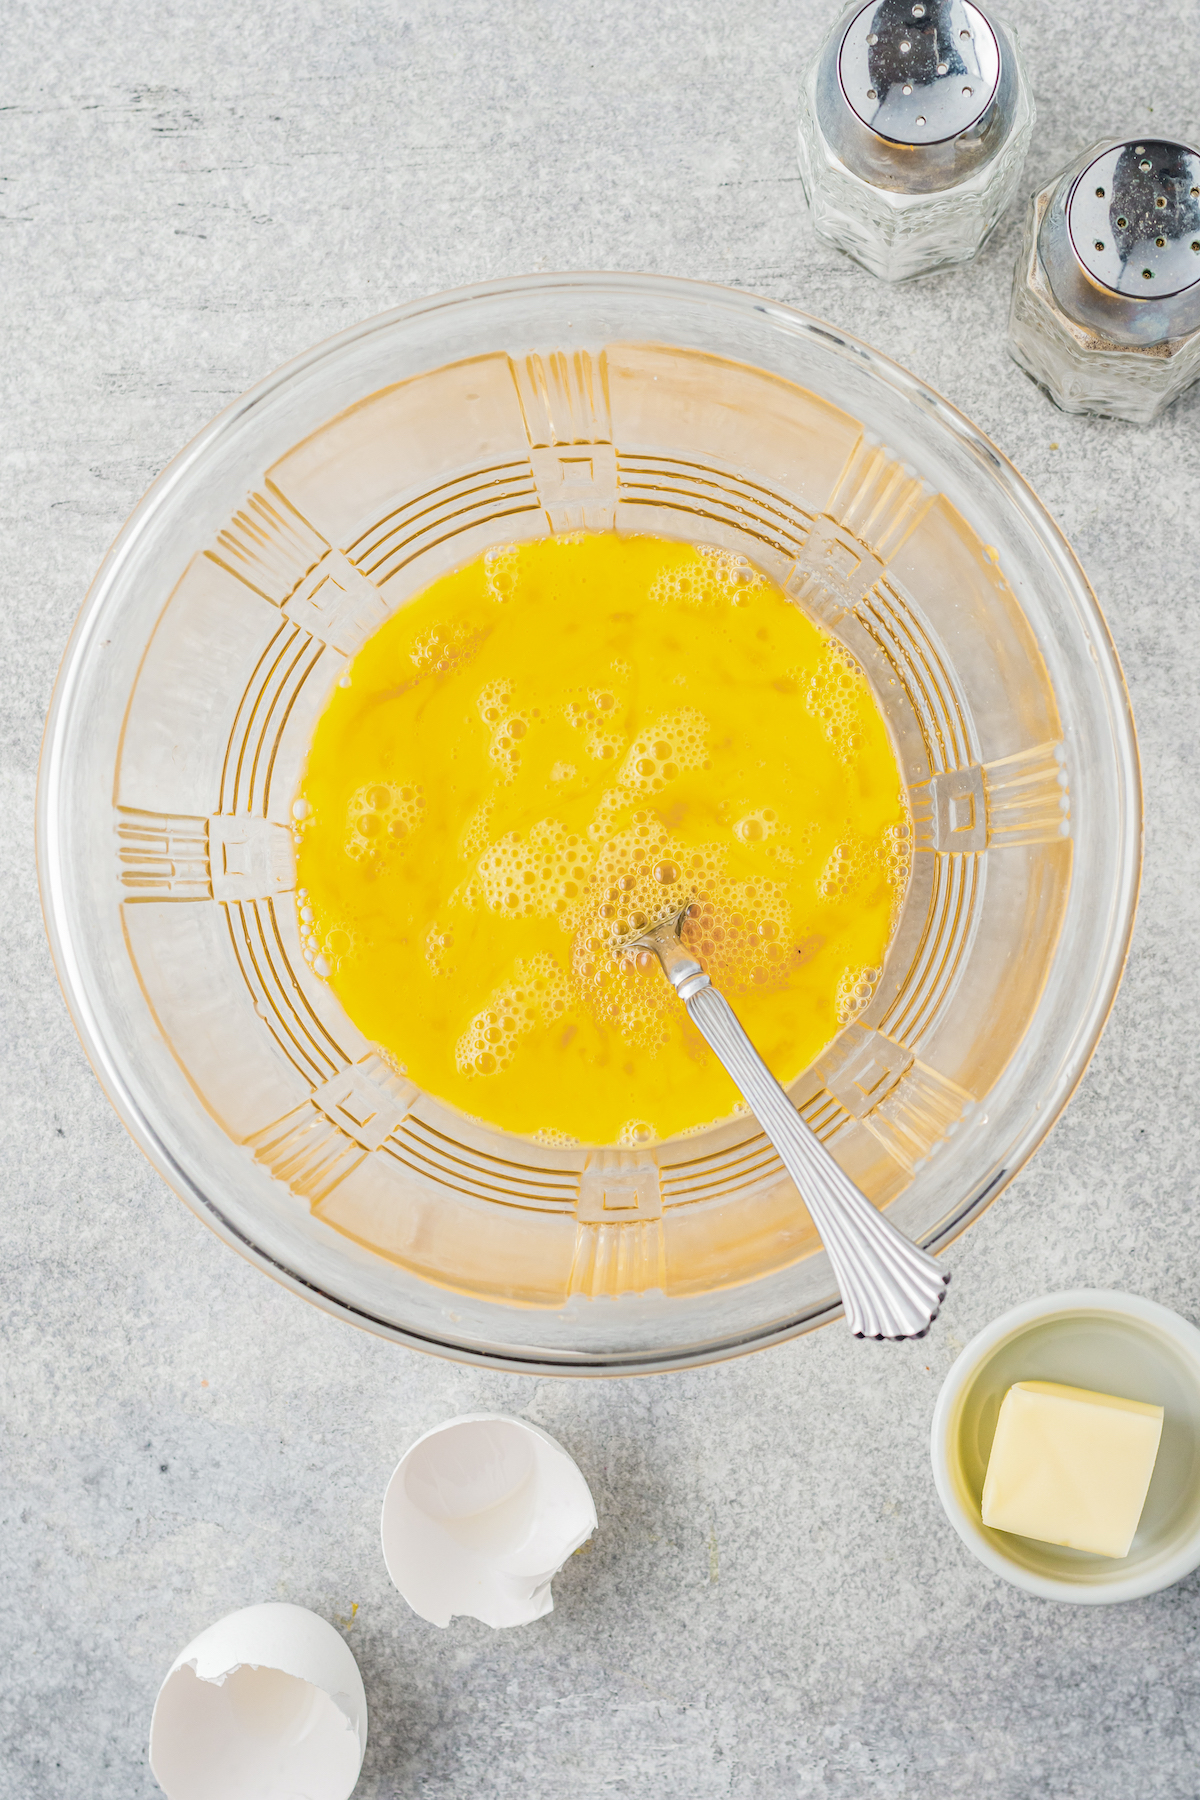 Eggs whisked together in a mixing bowl, with a fork.